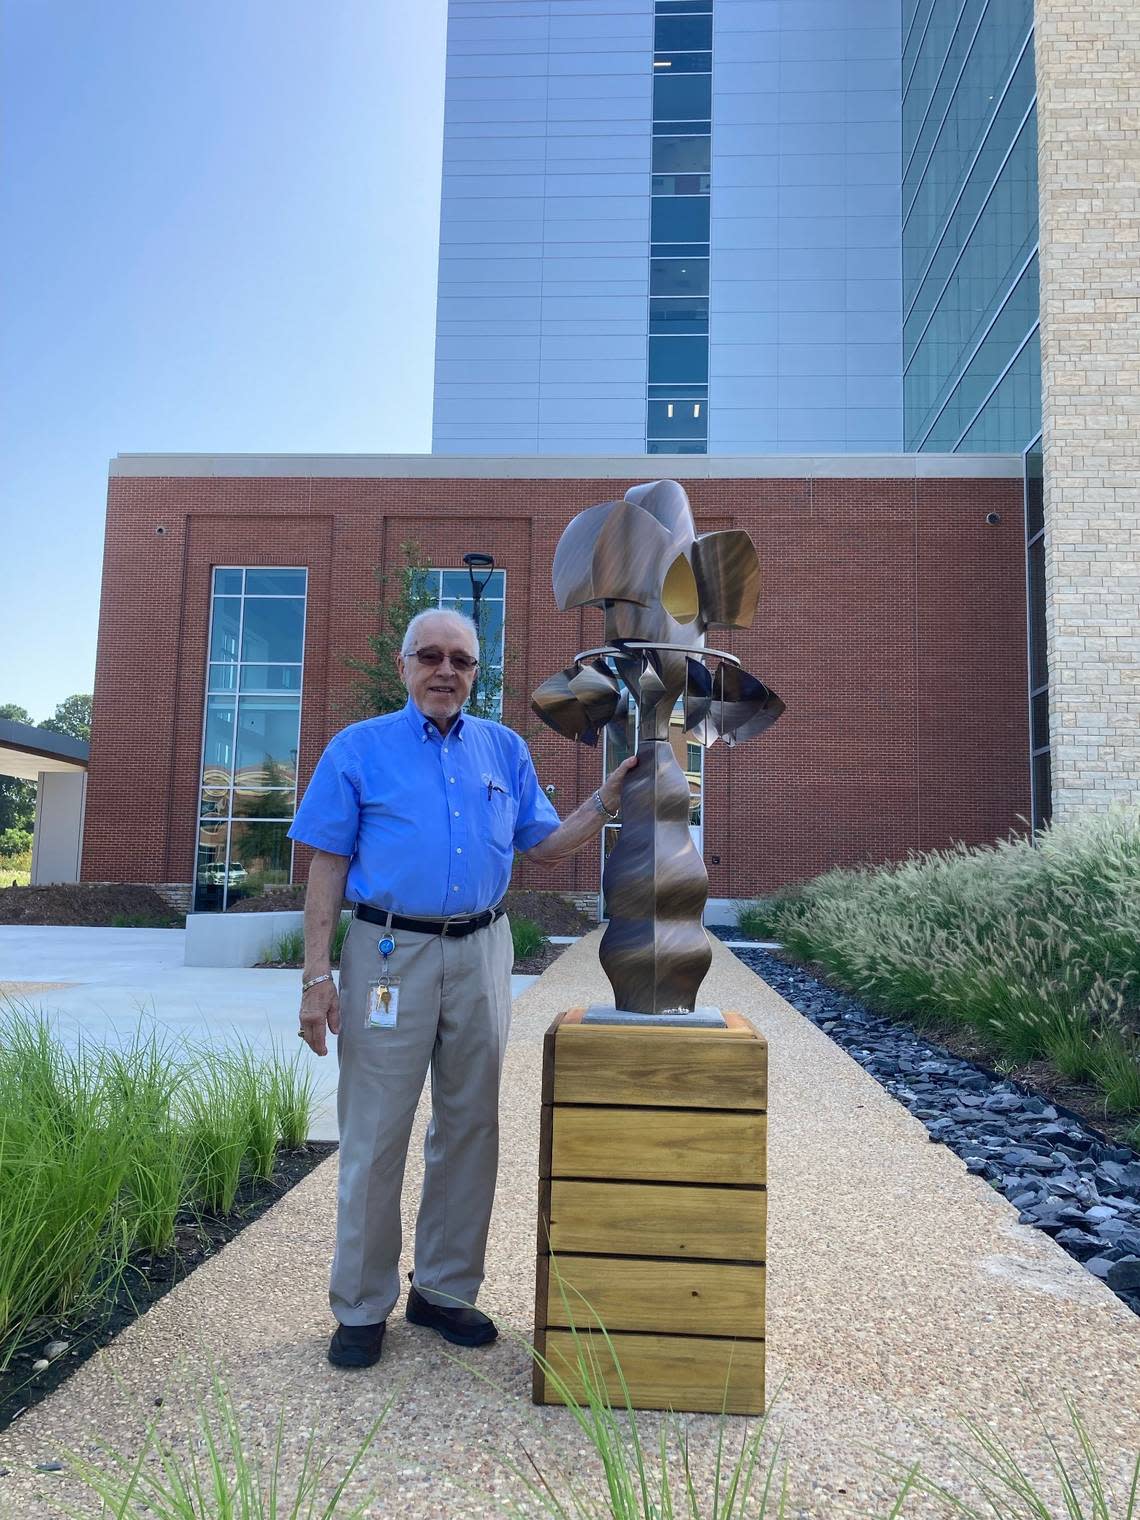 A sculpture in the courtyard of the Rex hospital in Holly Springs is dedicated to former Holly Springs Mayor Dick Sears. The leader was instrumental in getting the facility to the town.